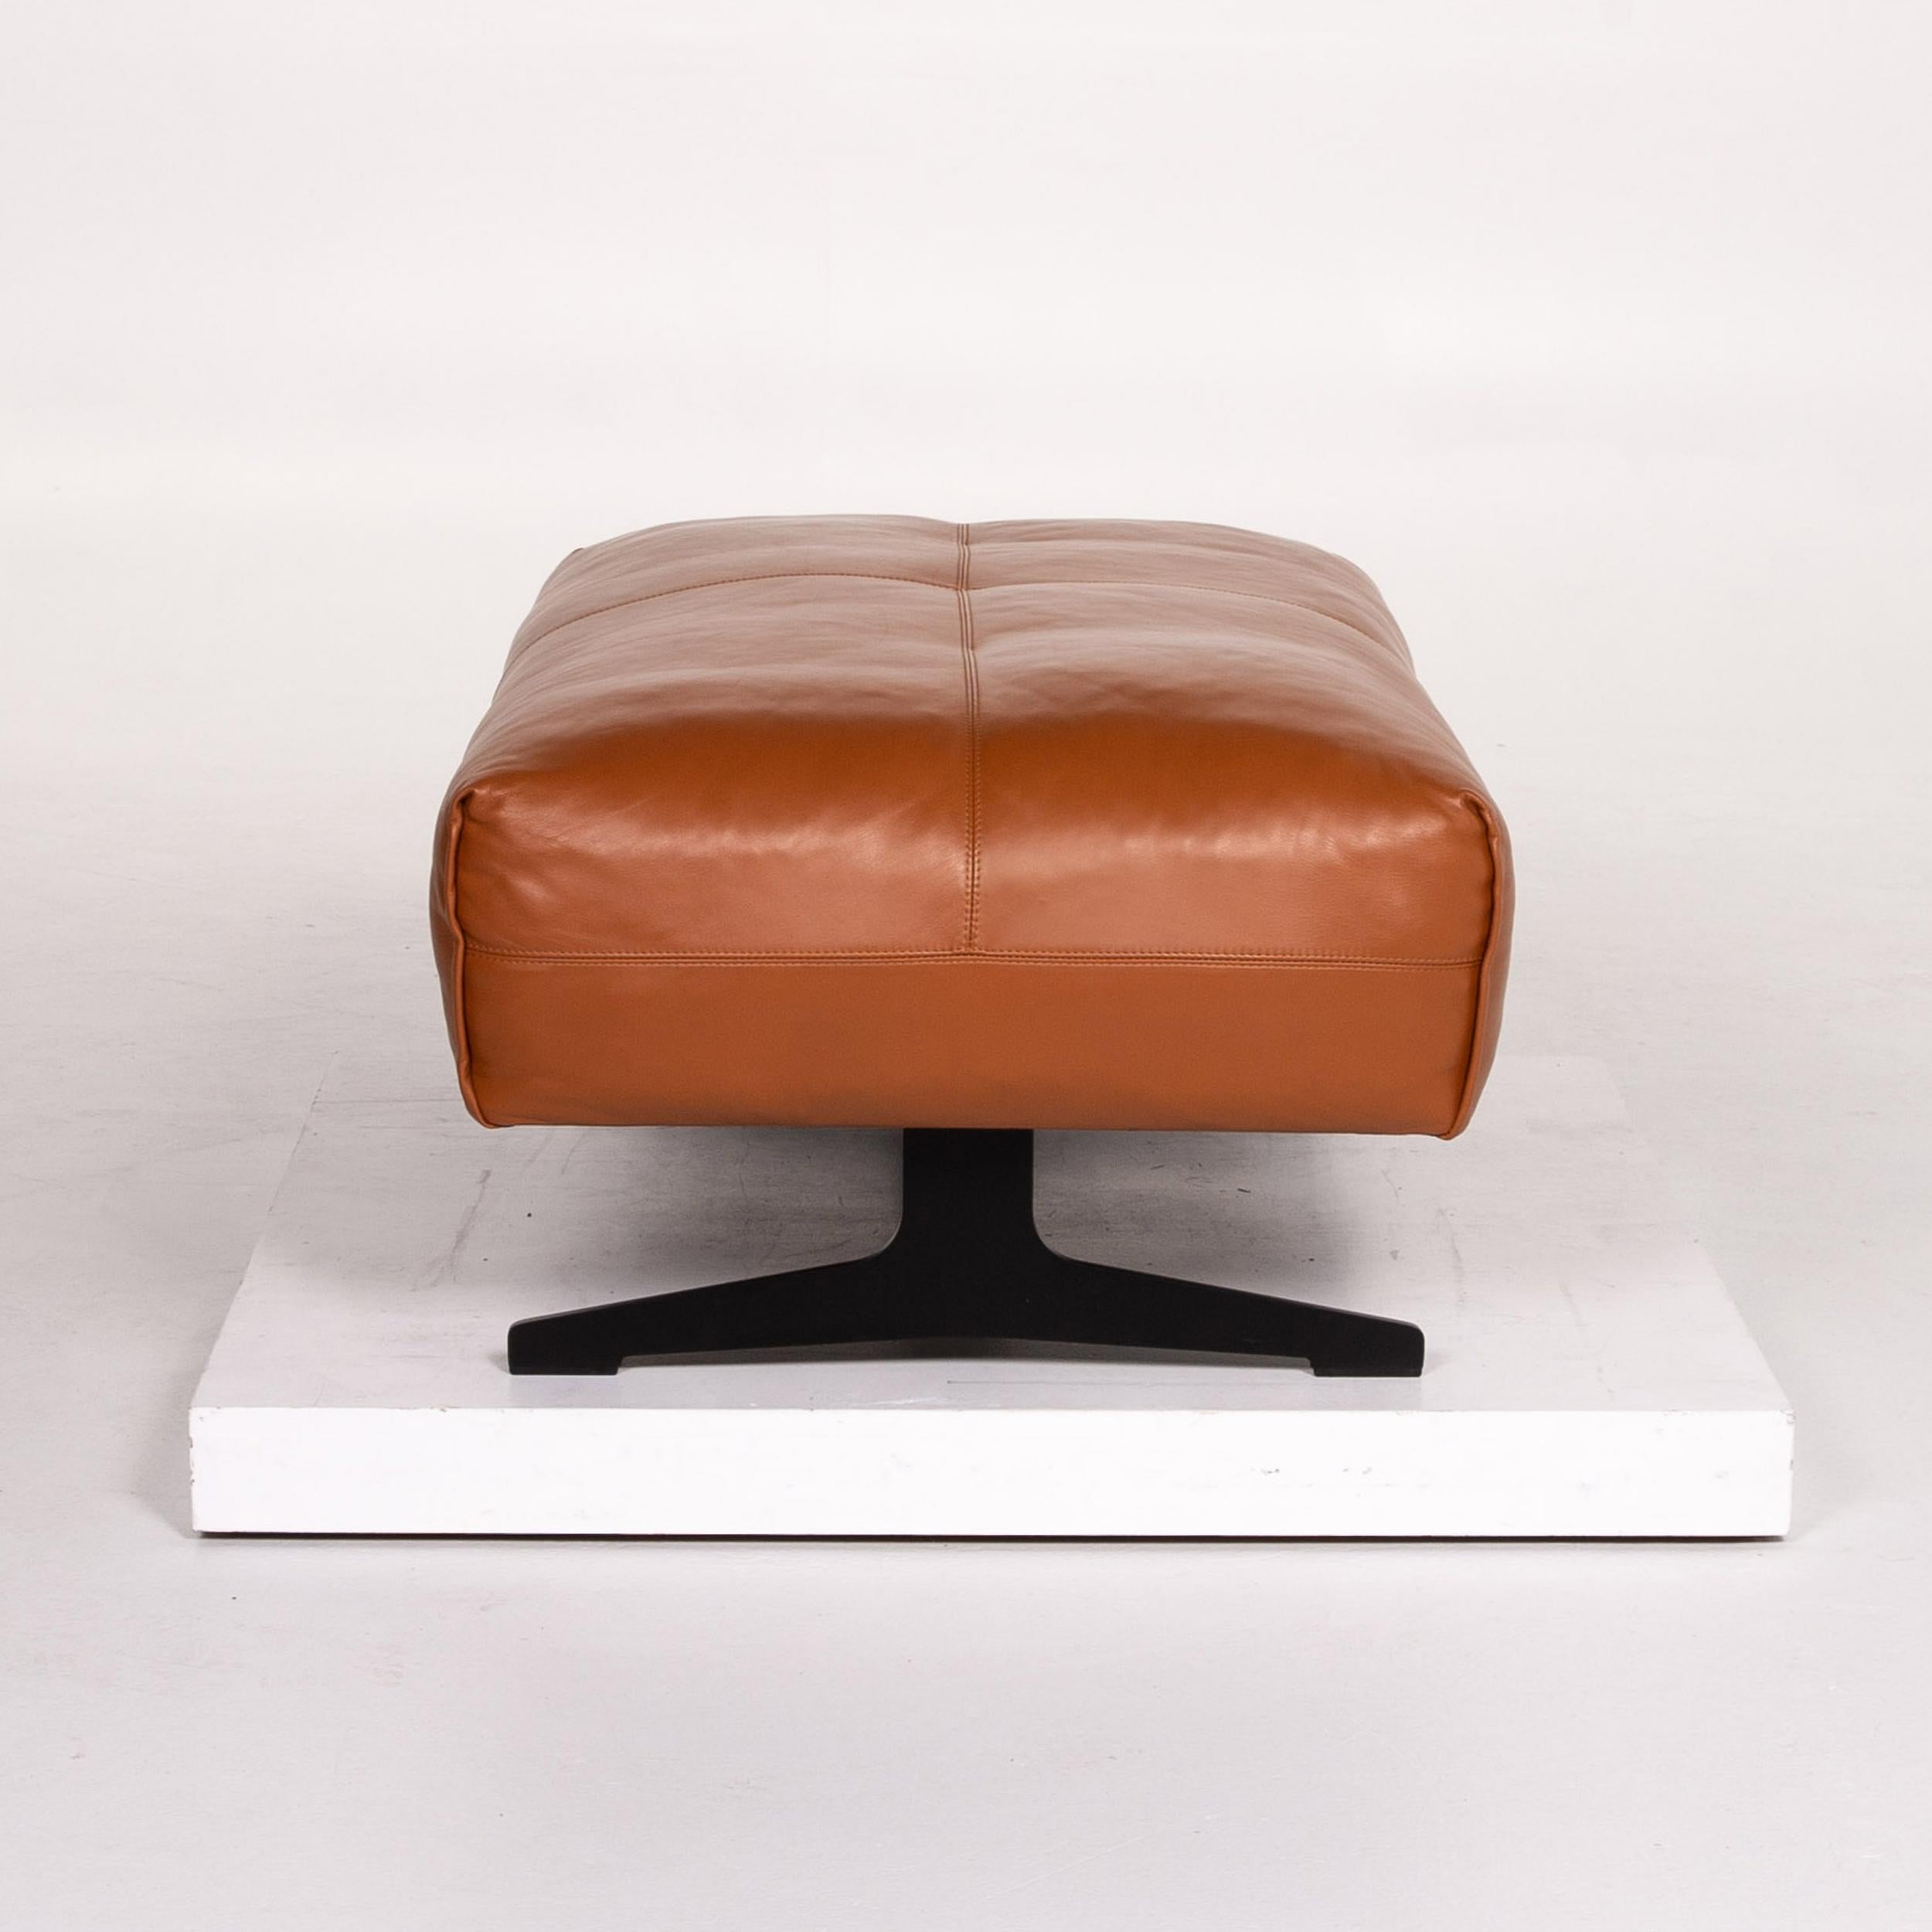 Rolf Benz 50 Leather Stool Cognac Brown Ottoman In Excellent Condition For Sale In Cologne, DE